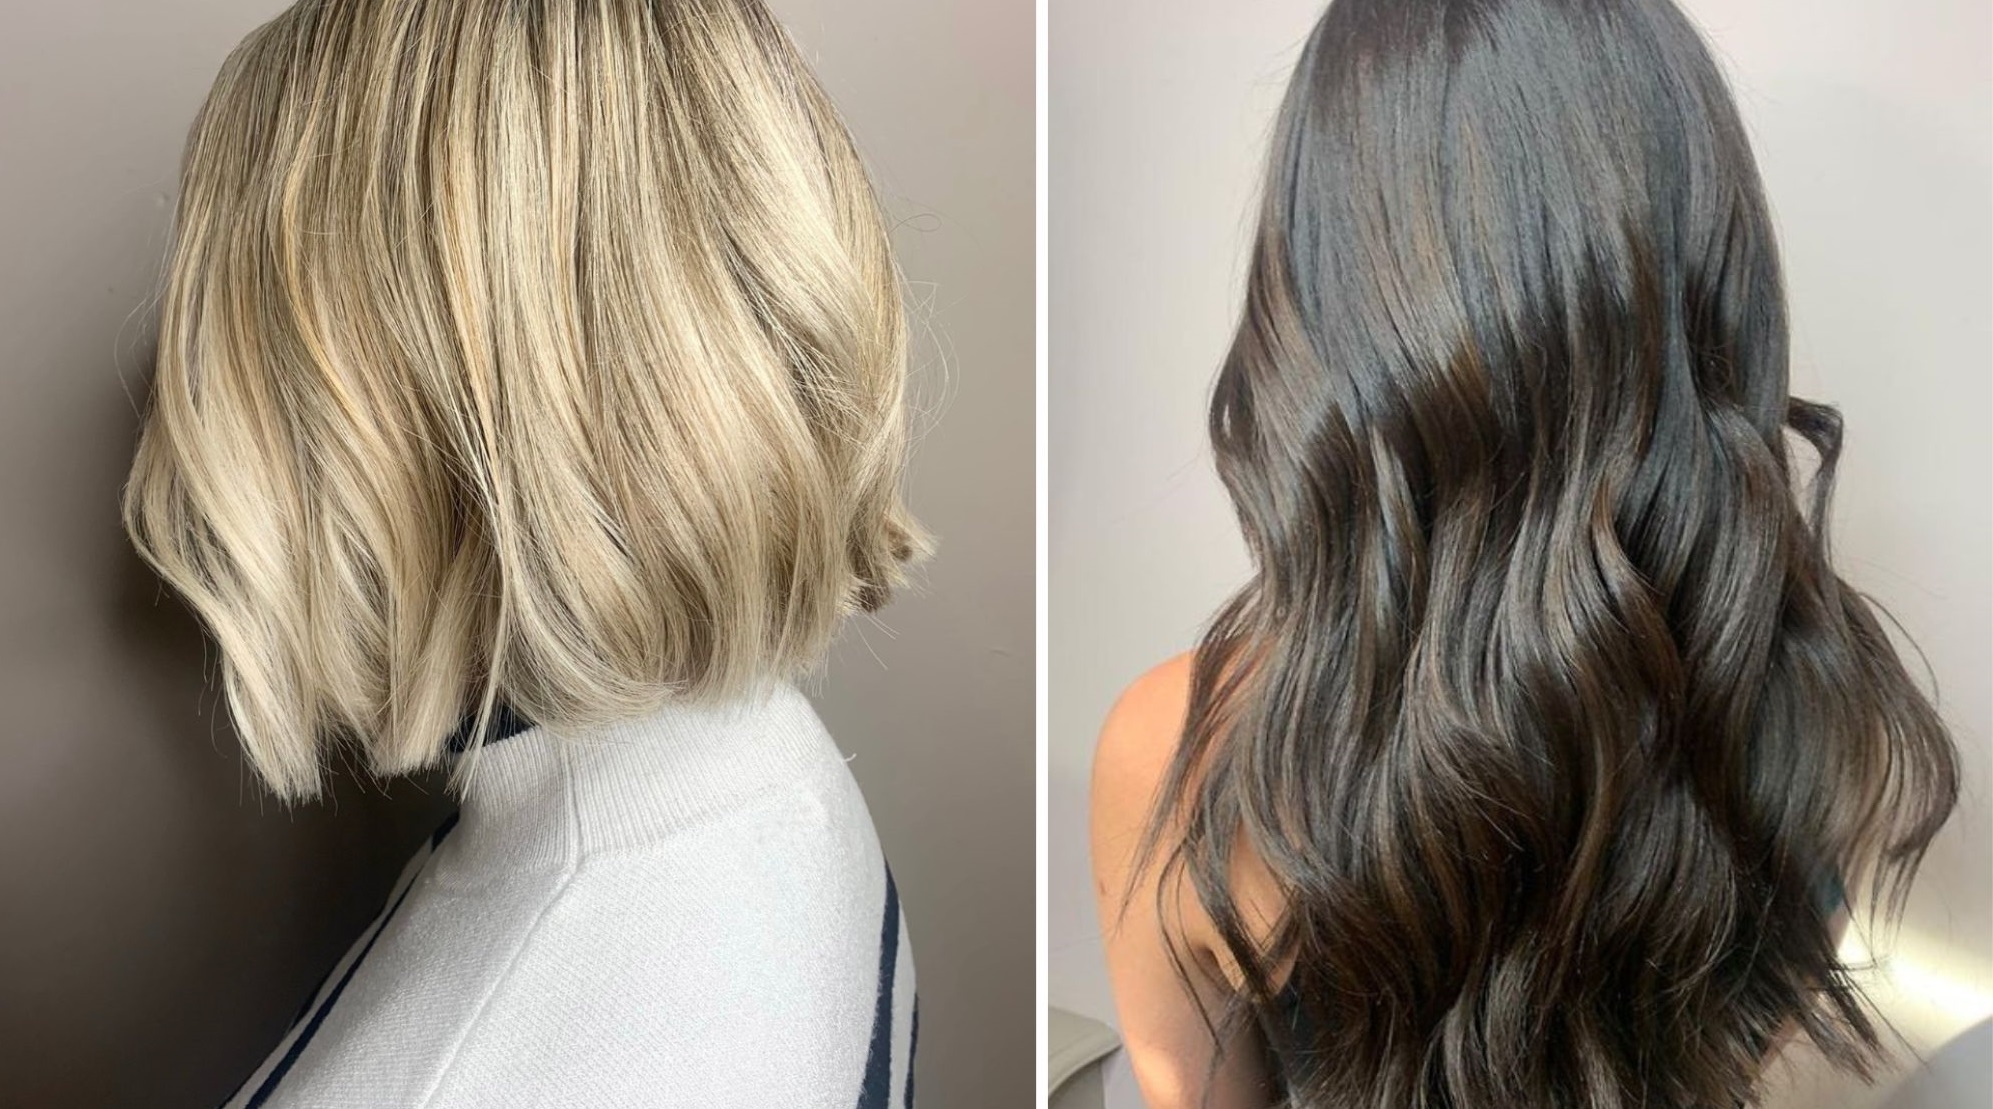 Blunt blonde bob and long brunette balayage at the salon.